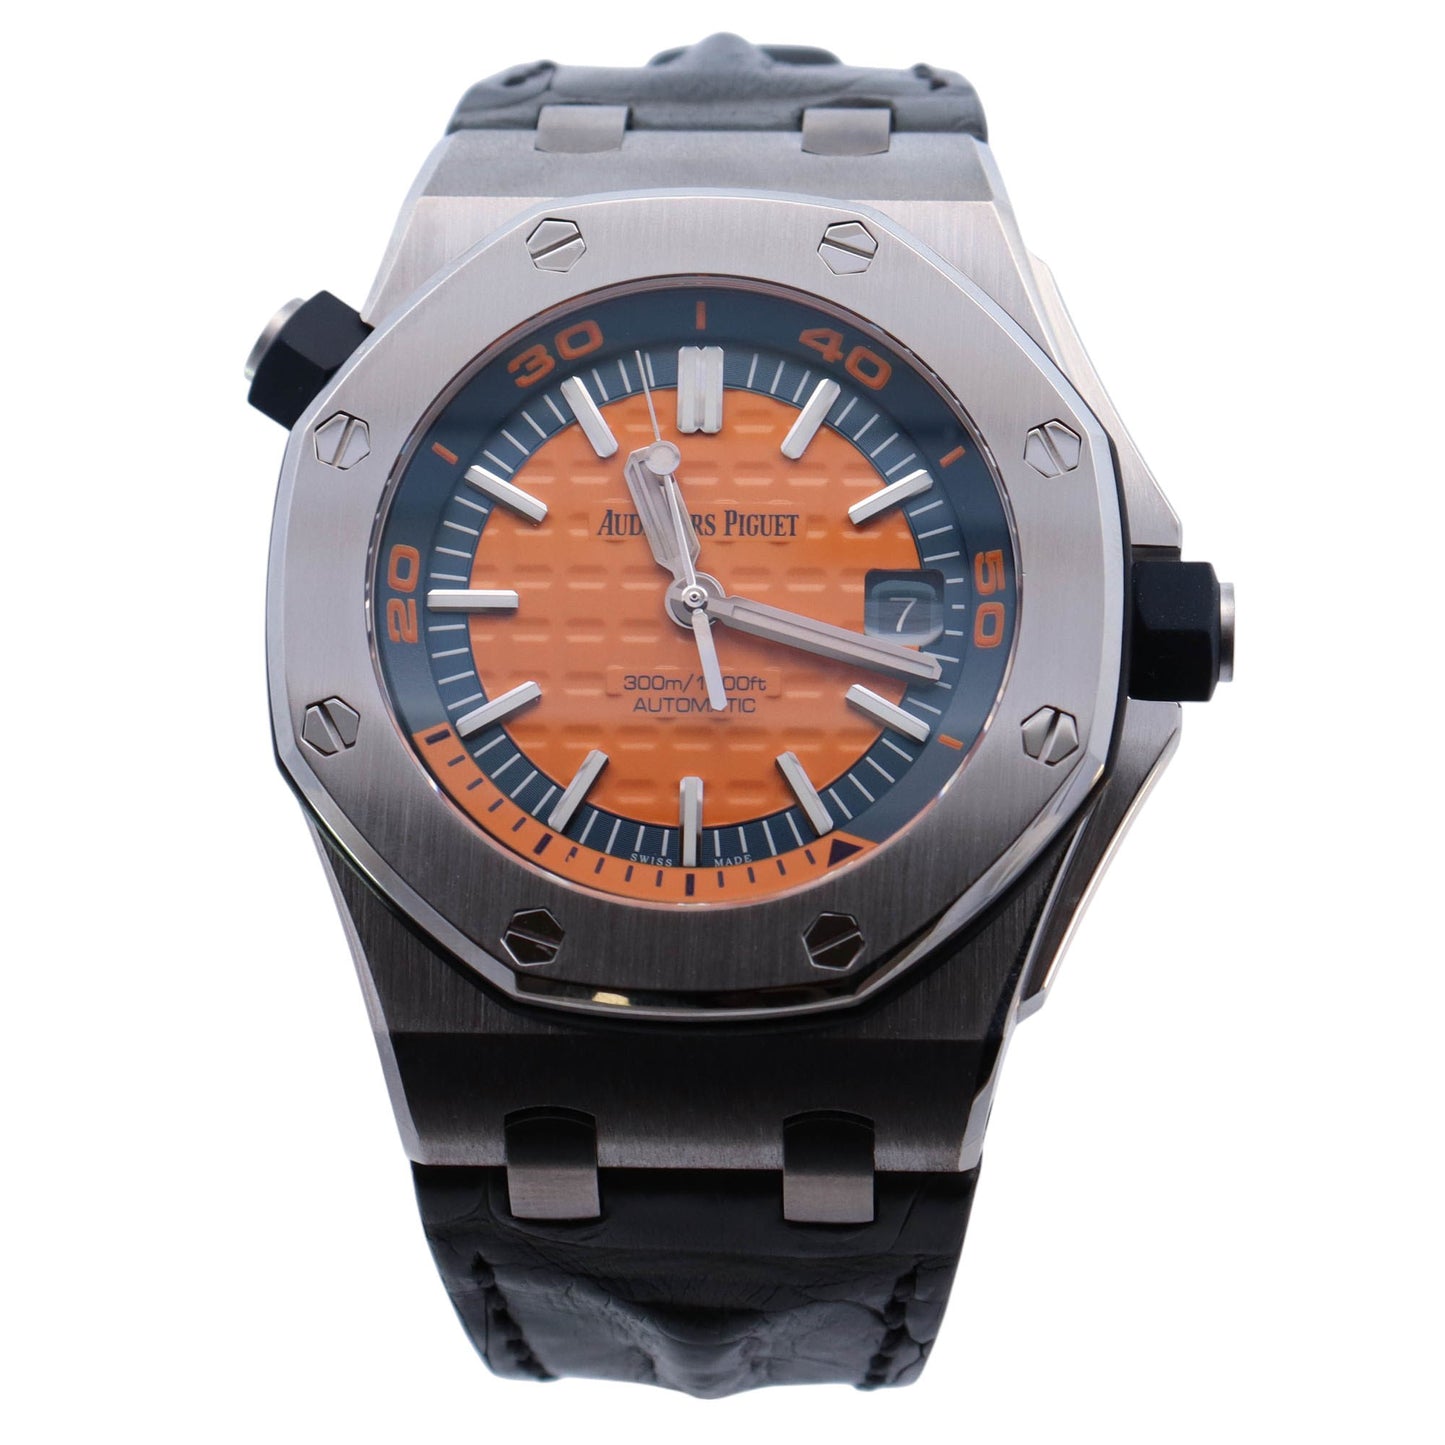 Audemars Piguet Royal Oak Offshore Diver Stainless Steel 42mm Orange/Blue Stick Dial Watch Reference# 15710ST.OO.A070CA.01 - Happy Jewelers Fine Jewelry Lifetime Warranty